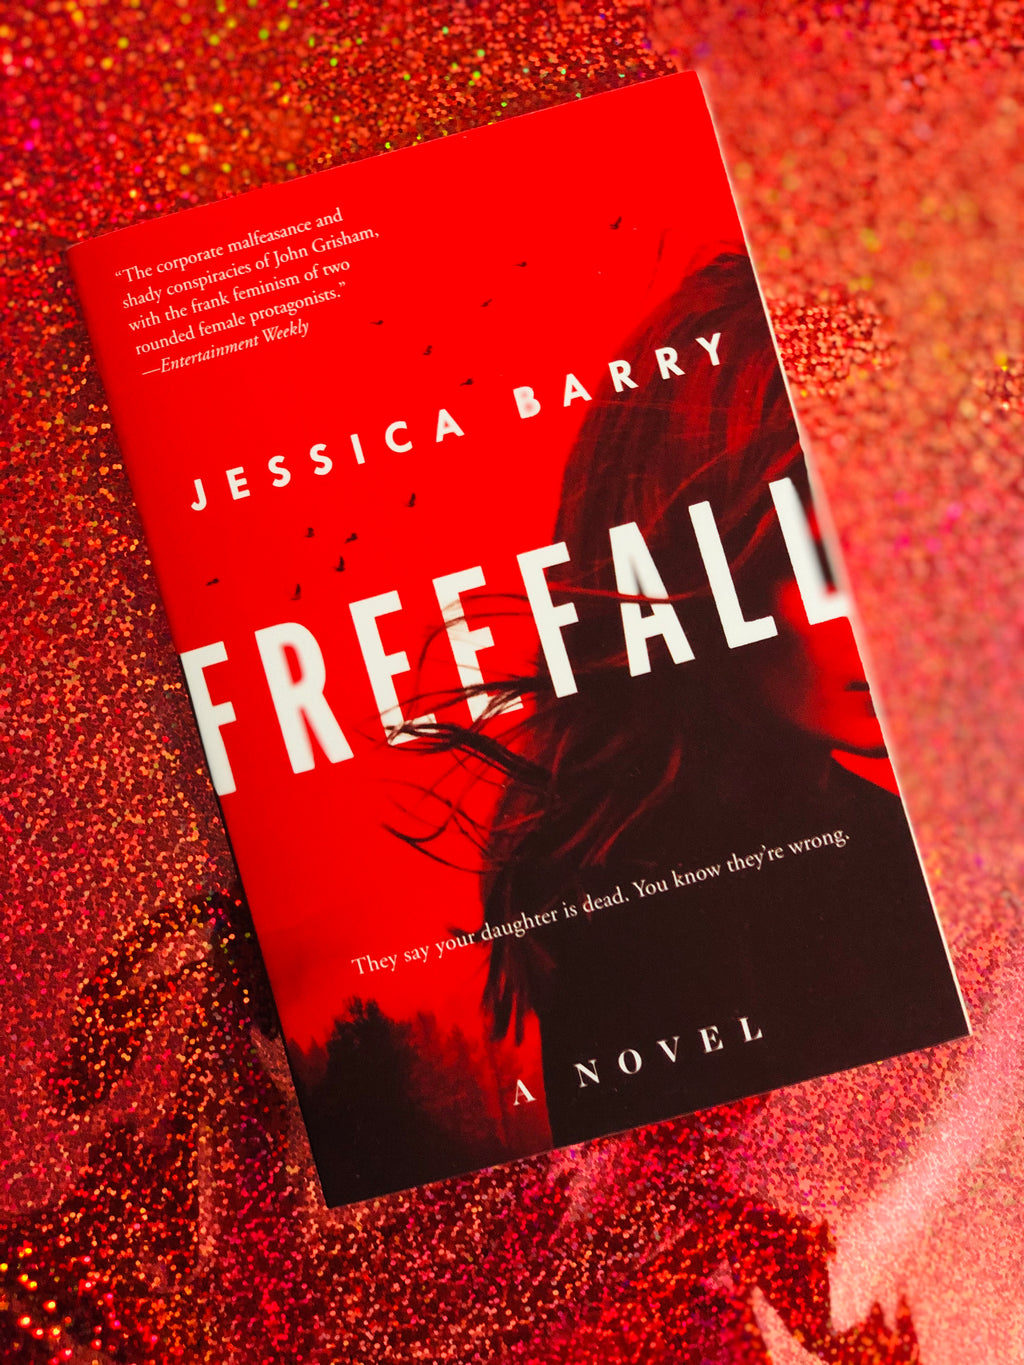 Freefall- By Jessica Barry